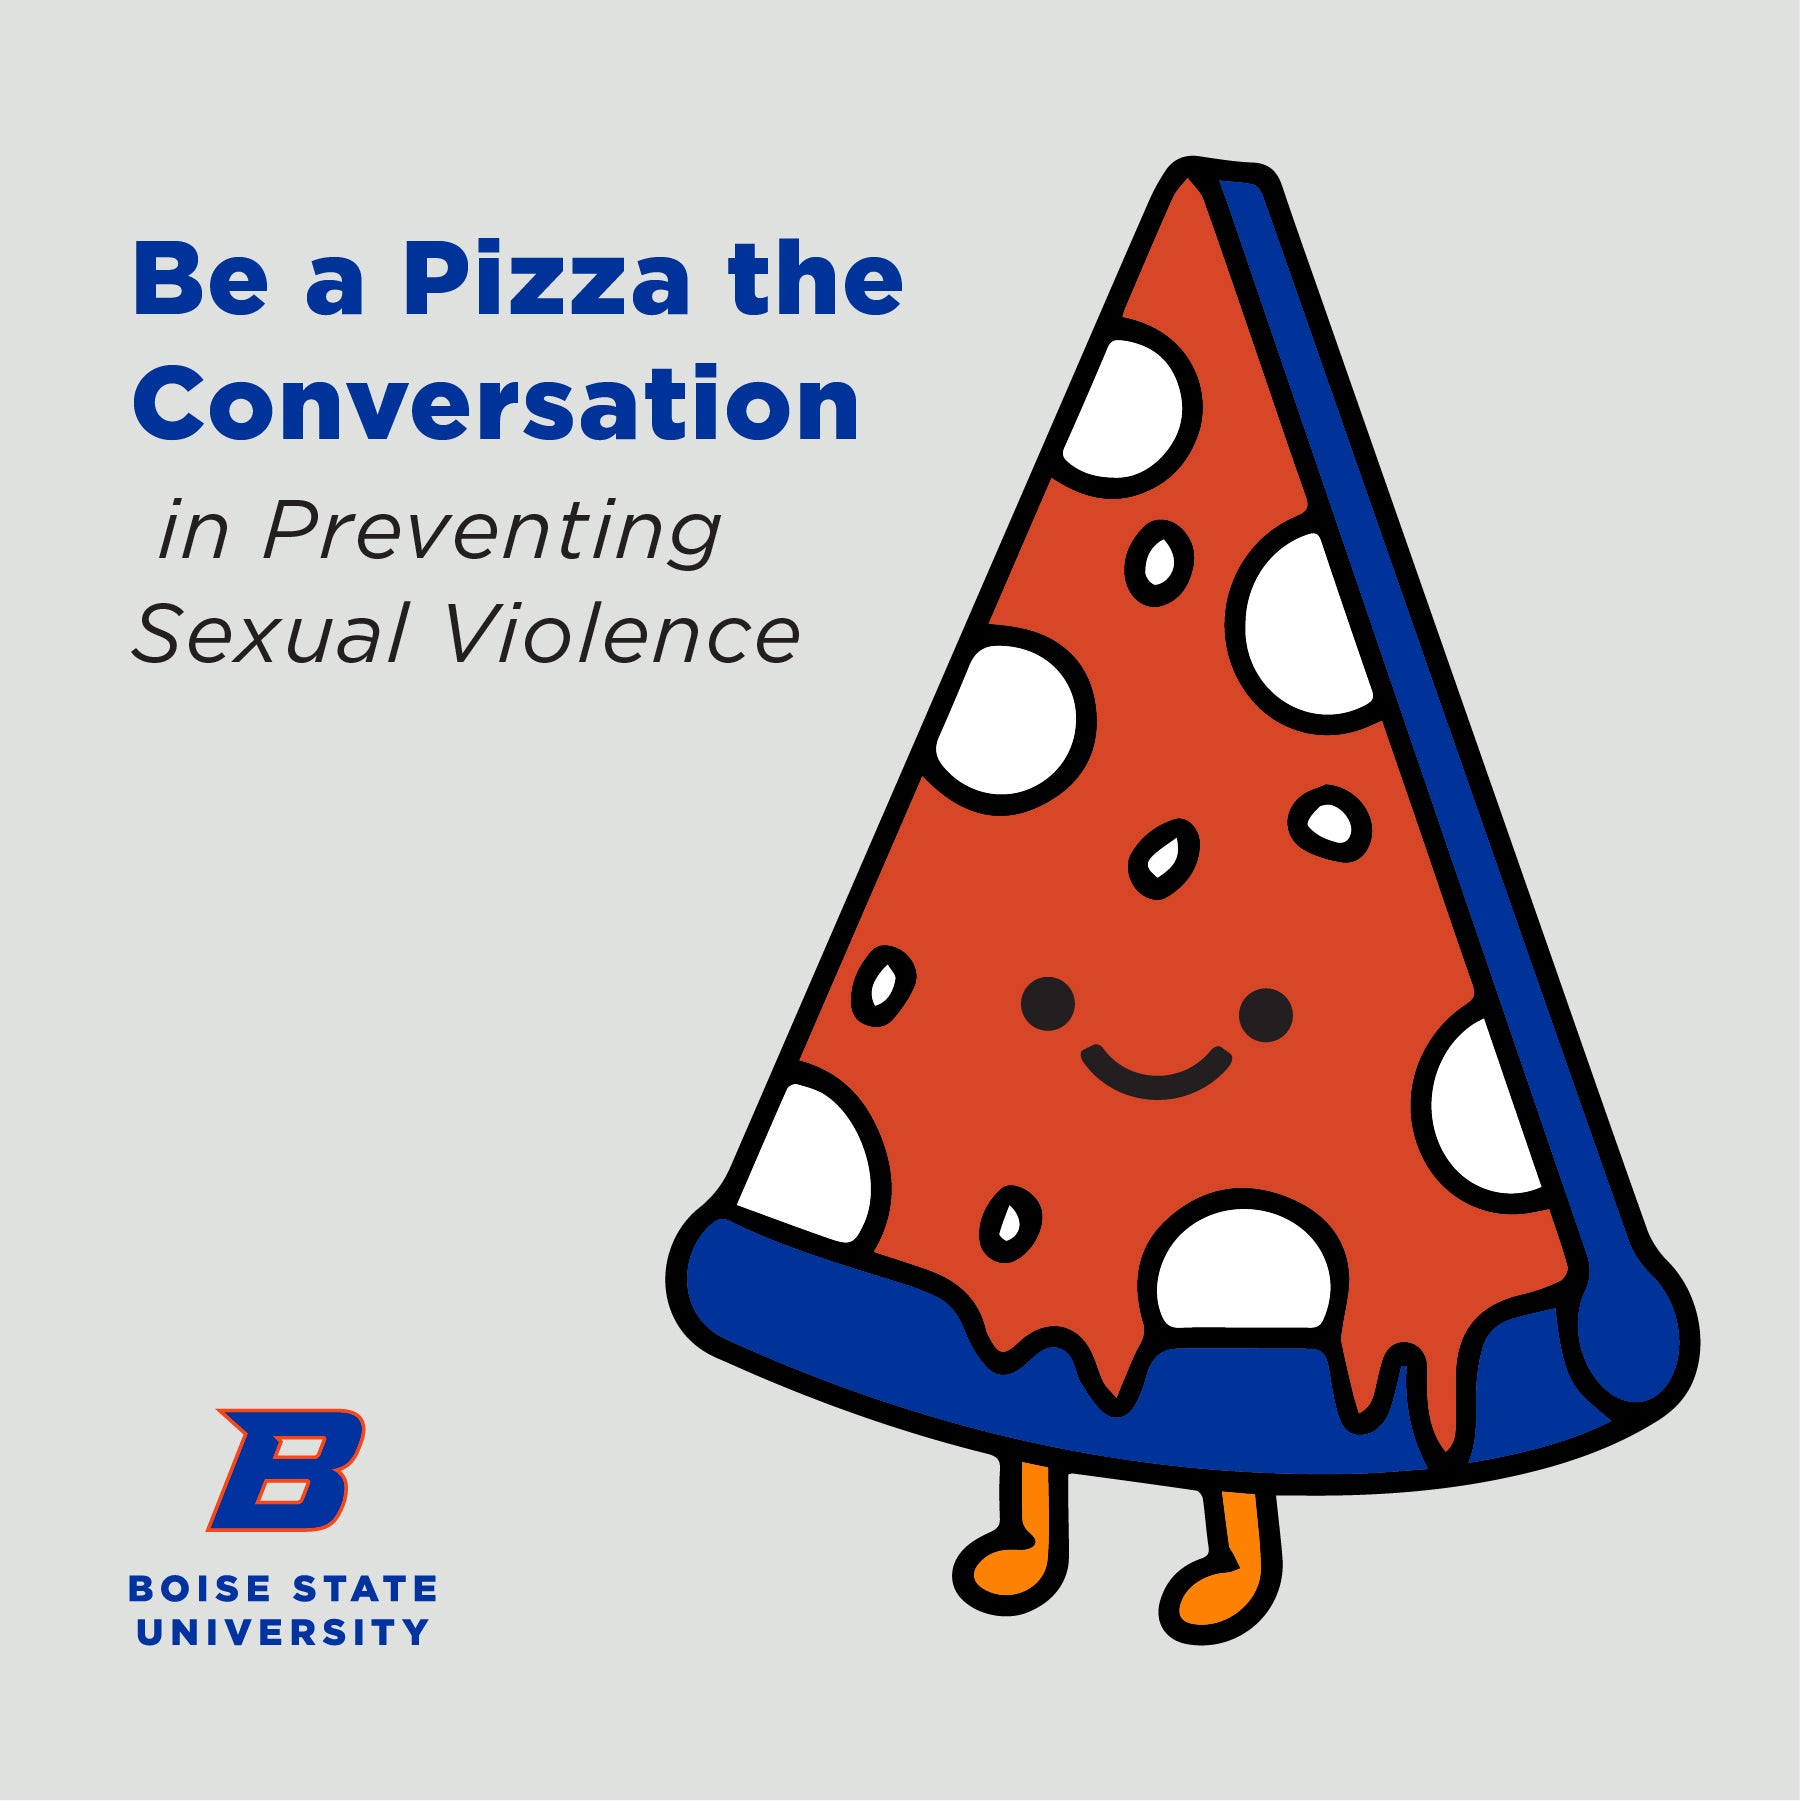 Be A Pizza the Conversation in preventing sexual violence. pizza emoji